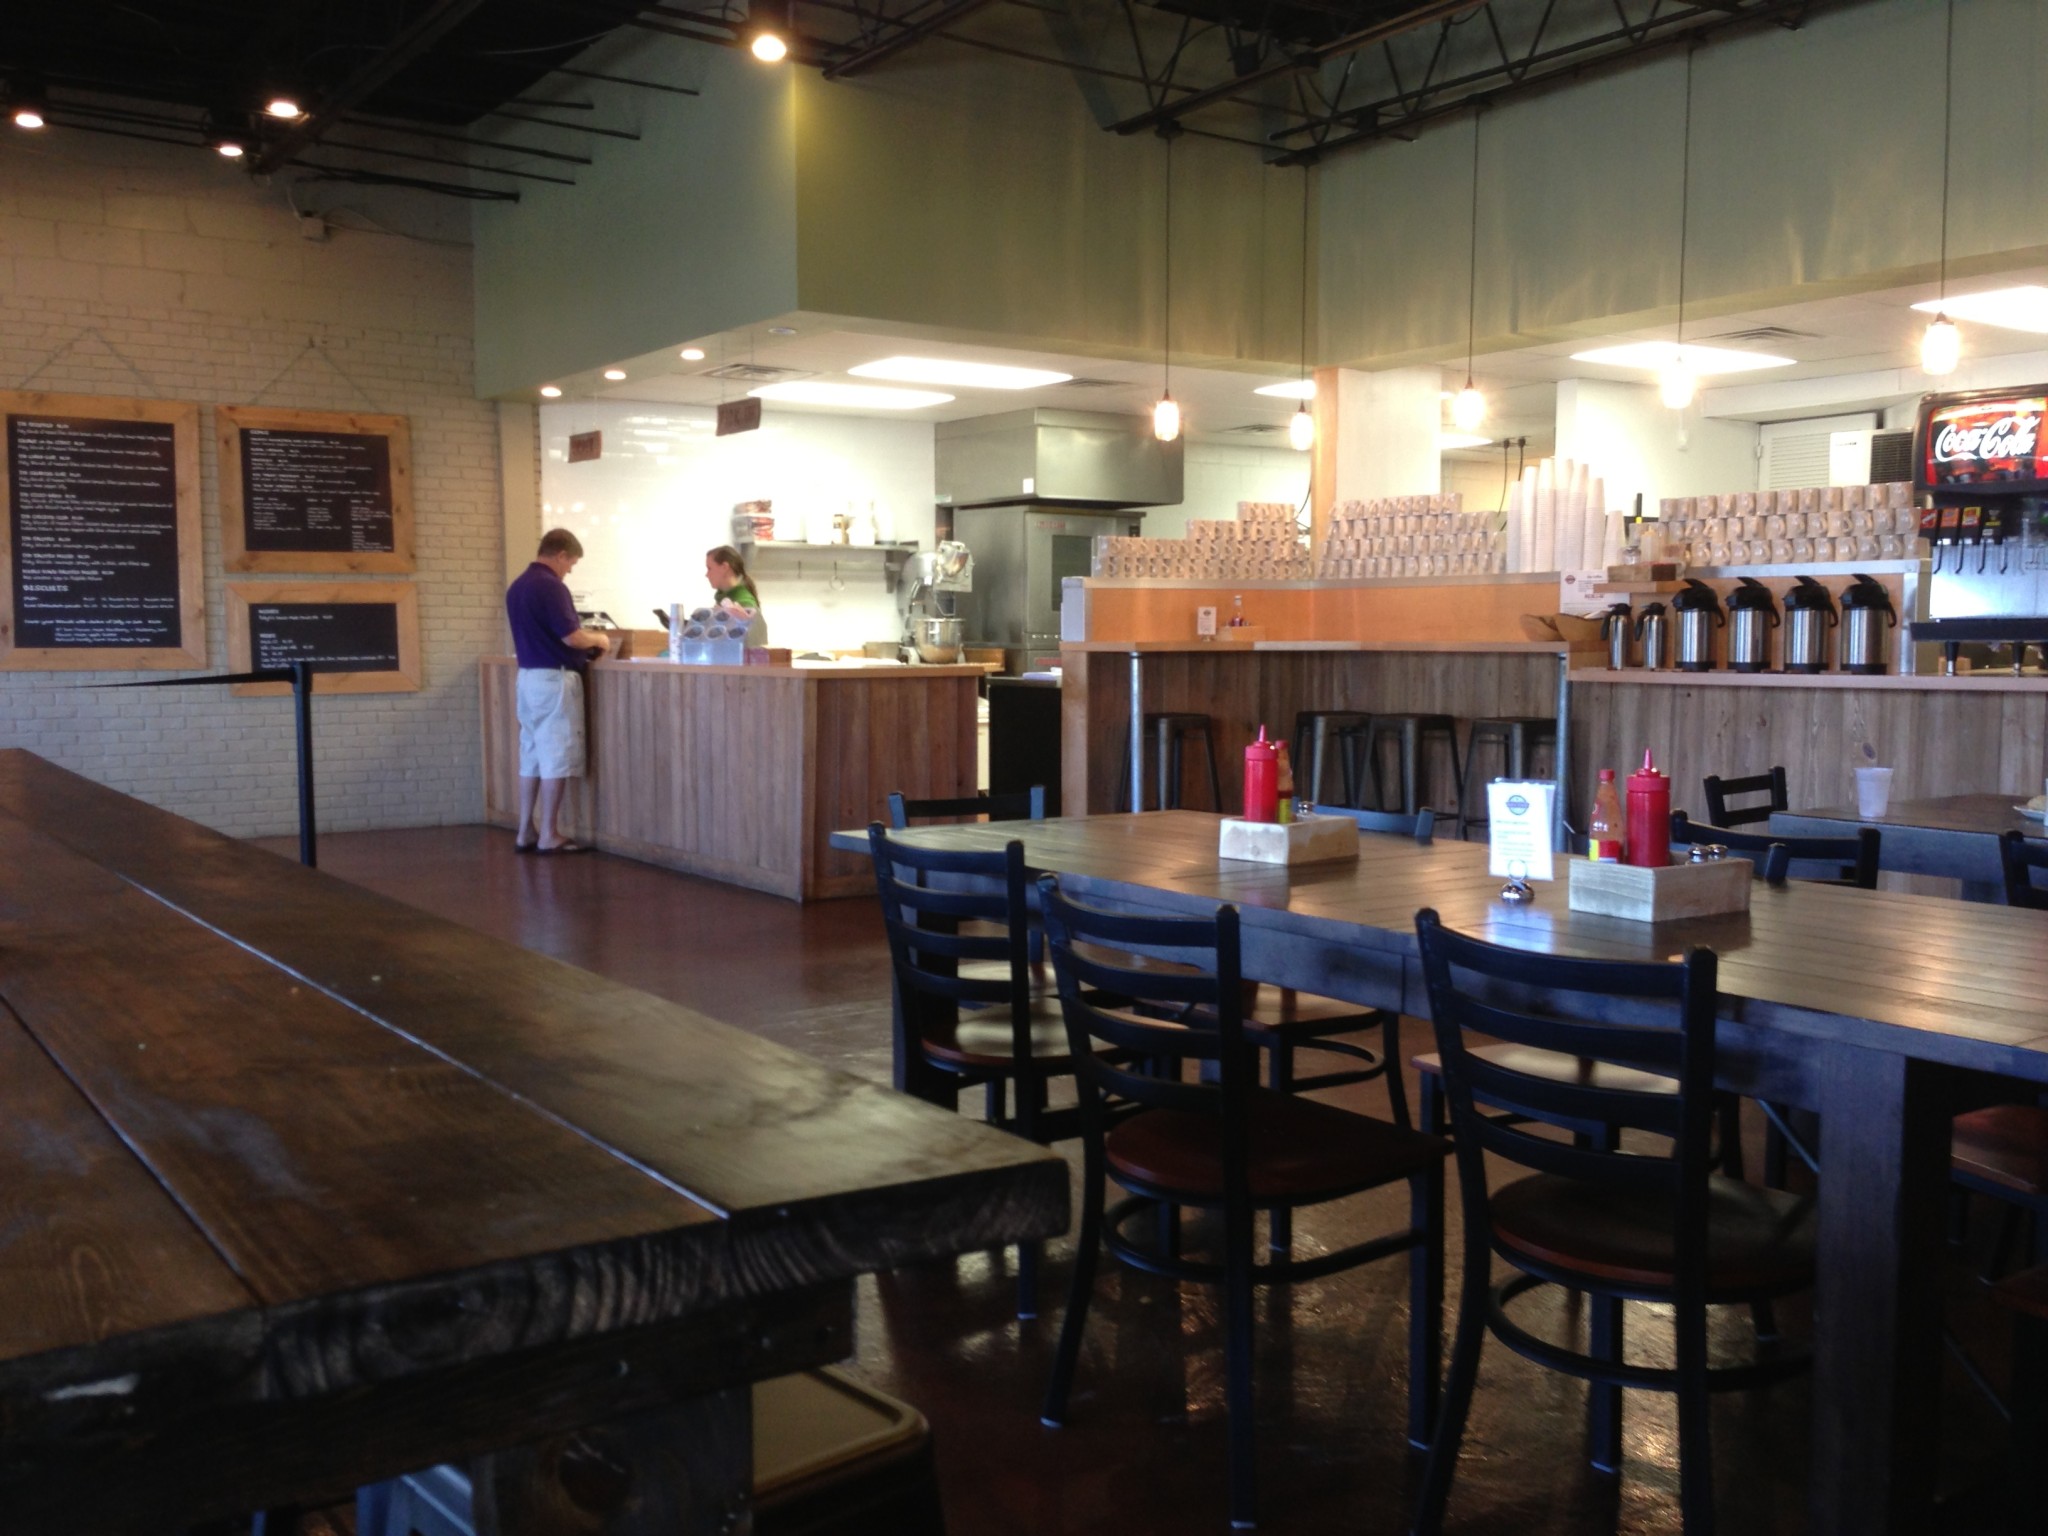 maple street biscuit company homewood